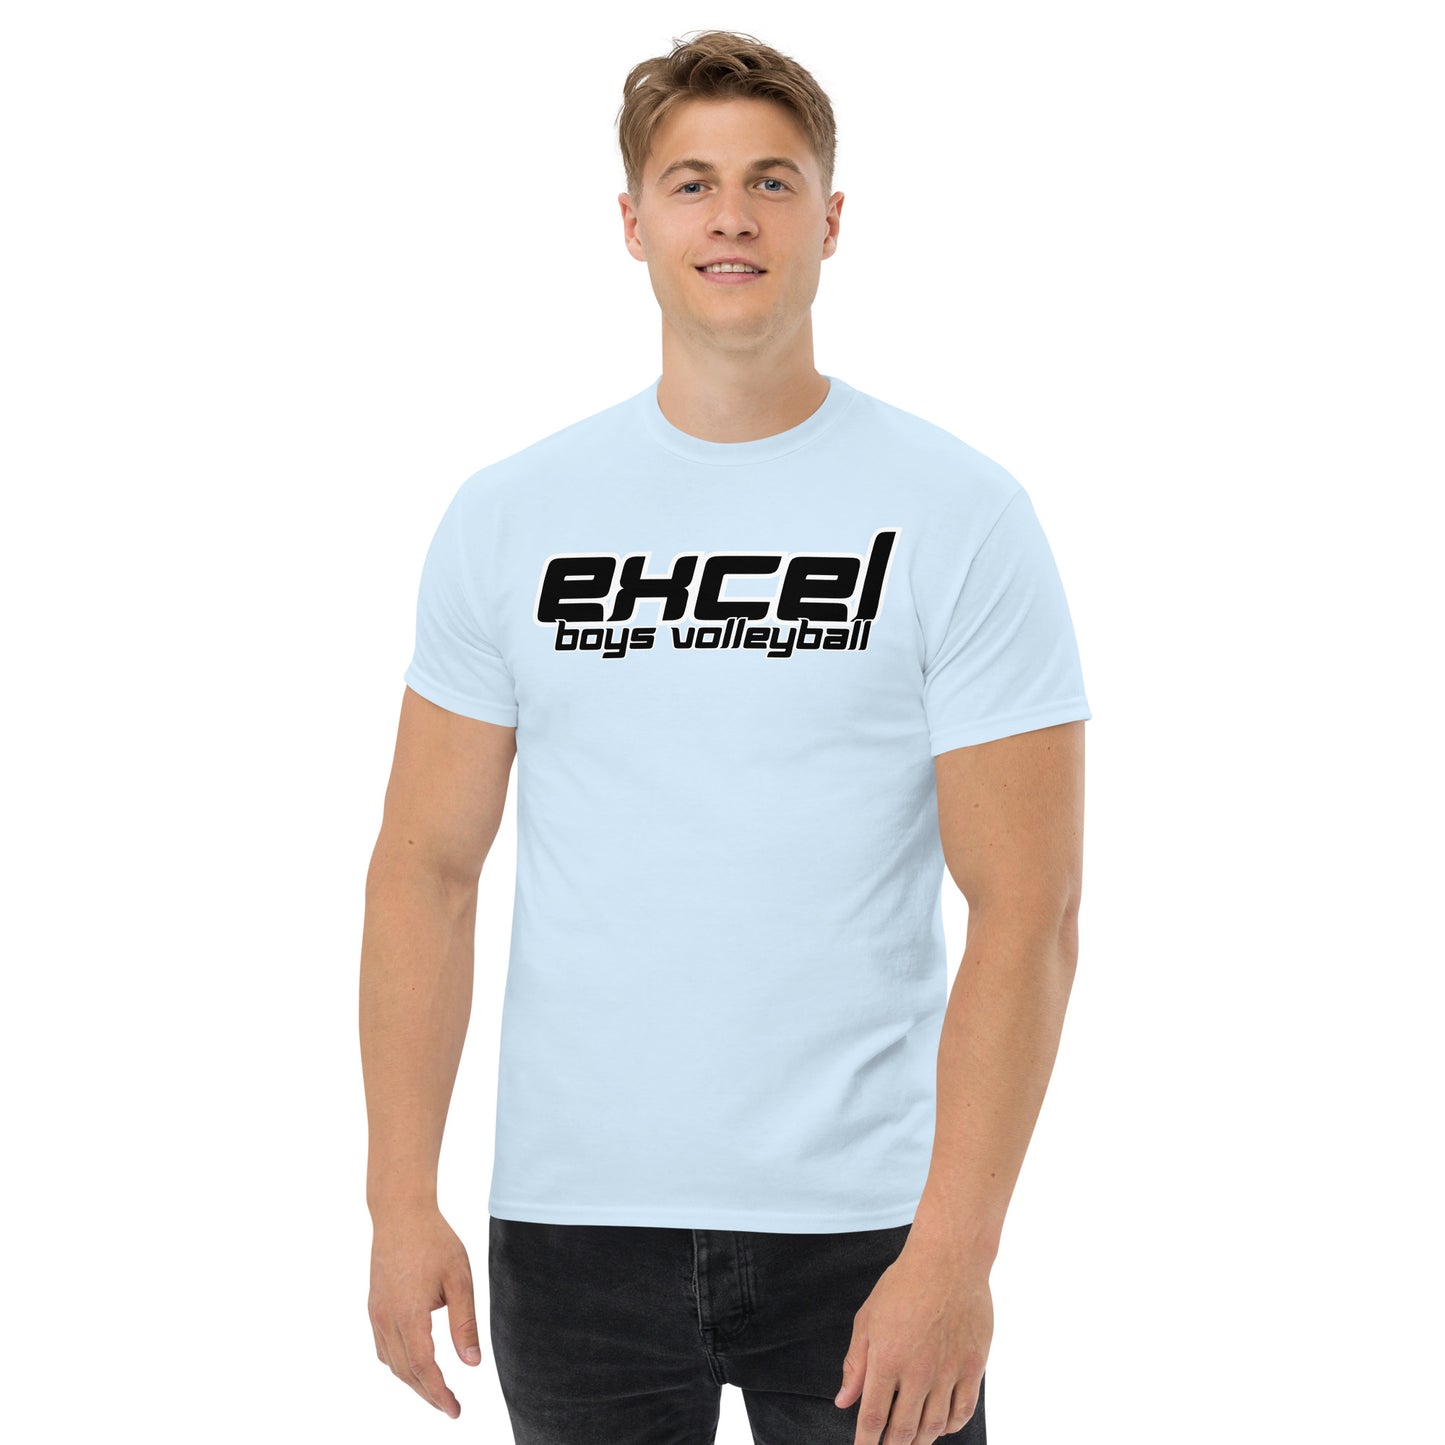 Excel - Boys Volleyball - Men's classic tee